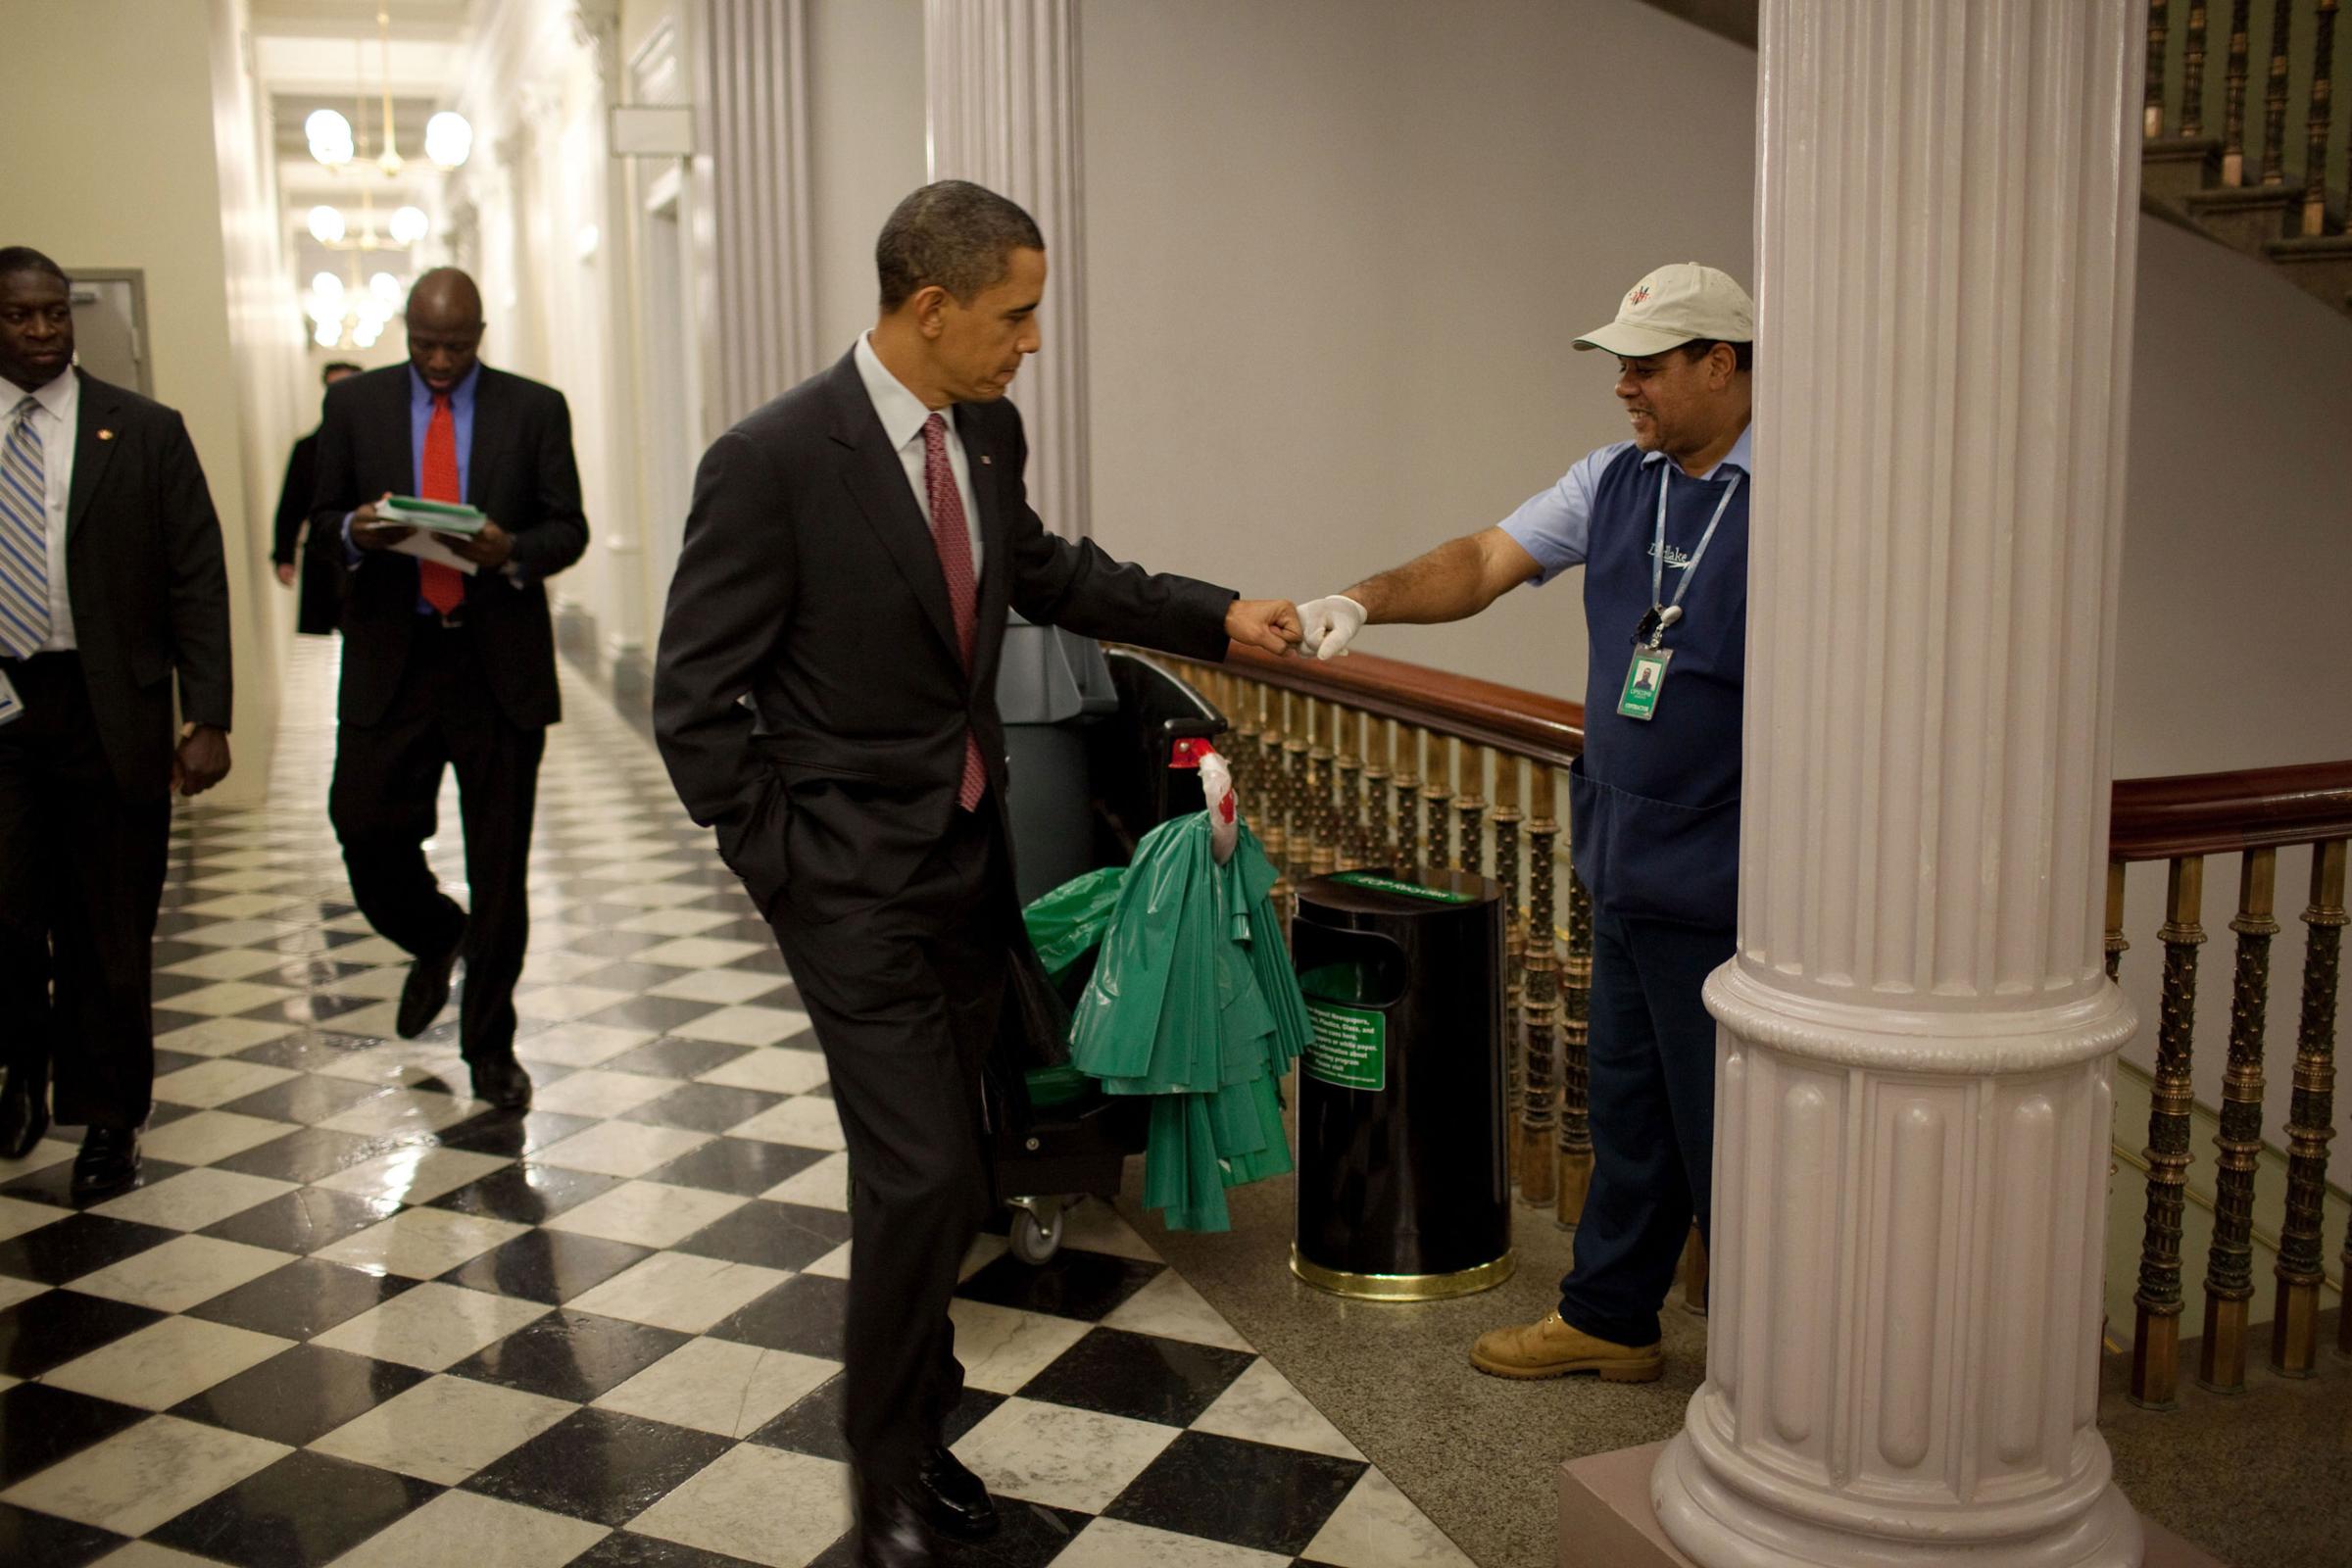 President Barack Obama fist-bumps custodian Lawrence Lipscomb in the Eisenhower Executive Office Building following the opening session of the White House Forum on Jobs and Economic Growth, Dec. 3, 2009.